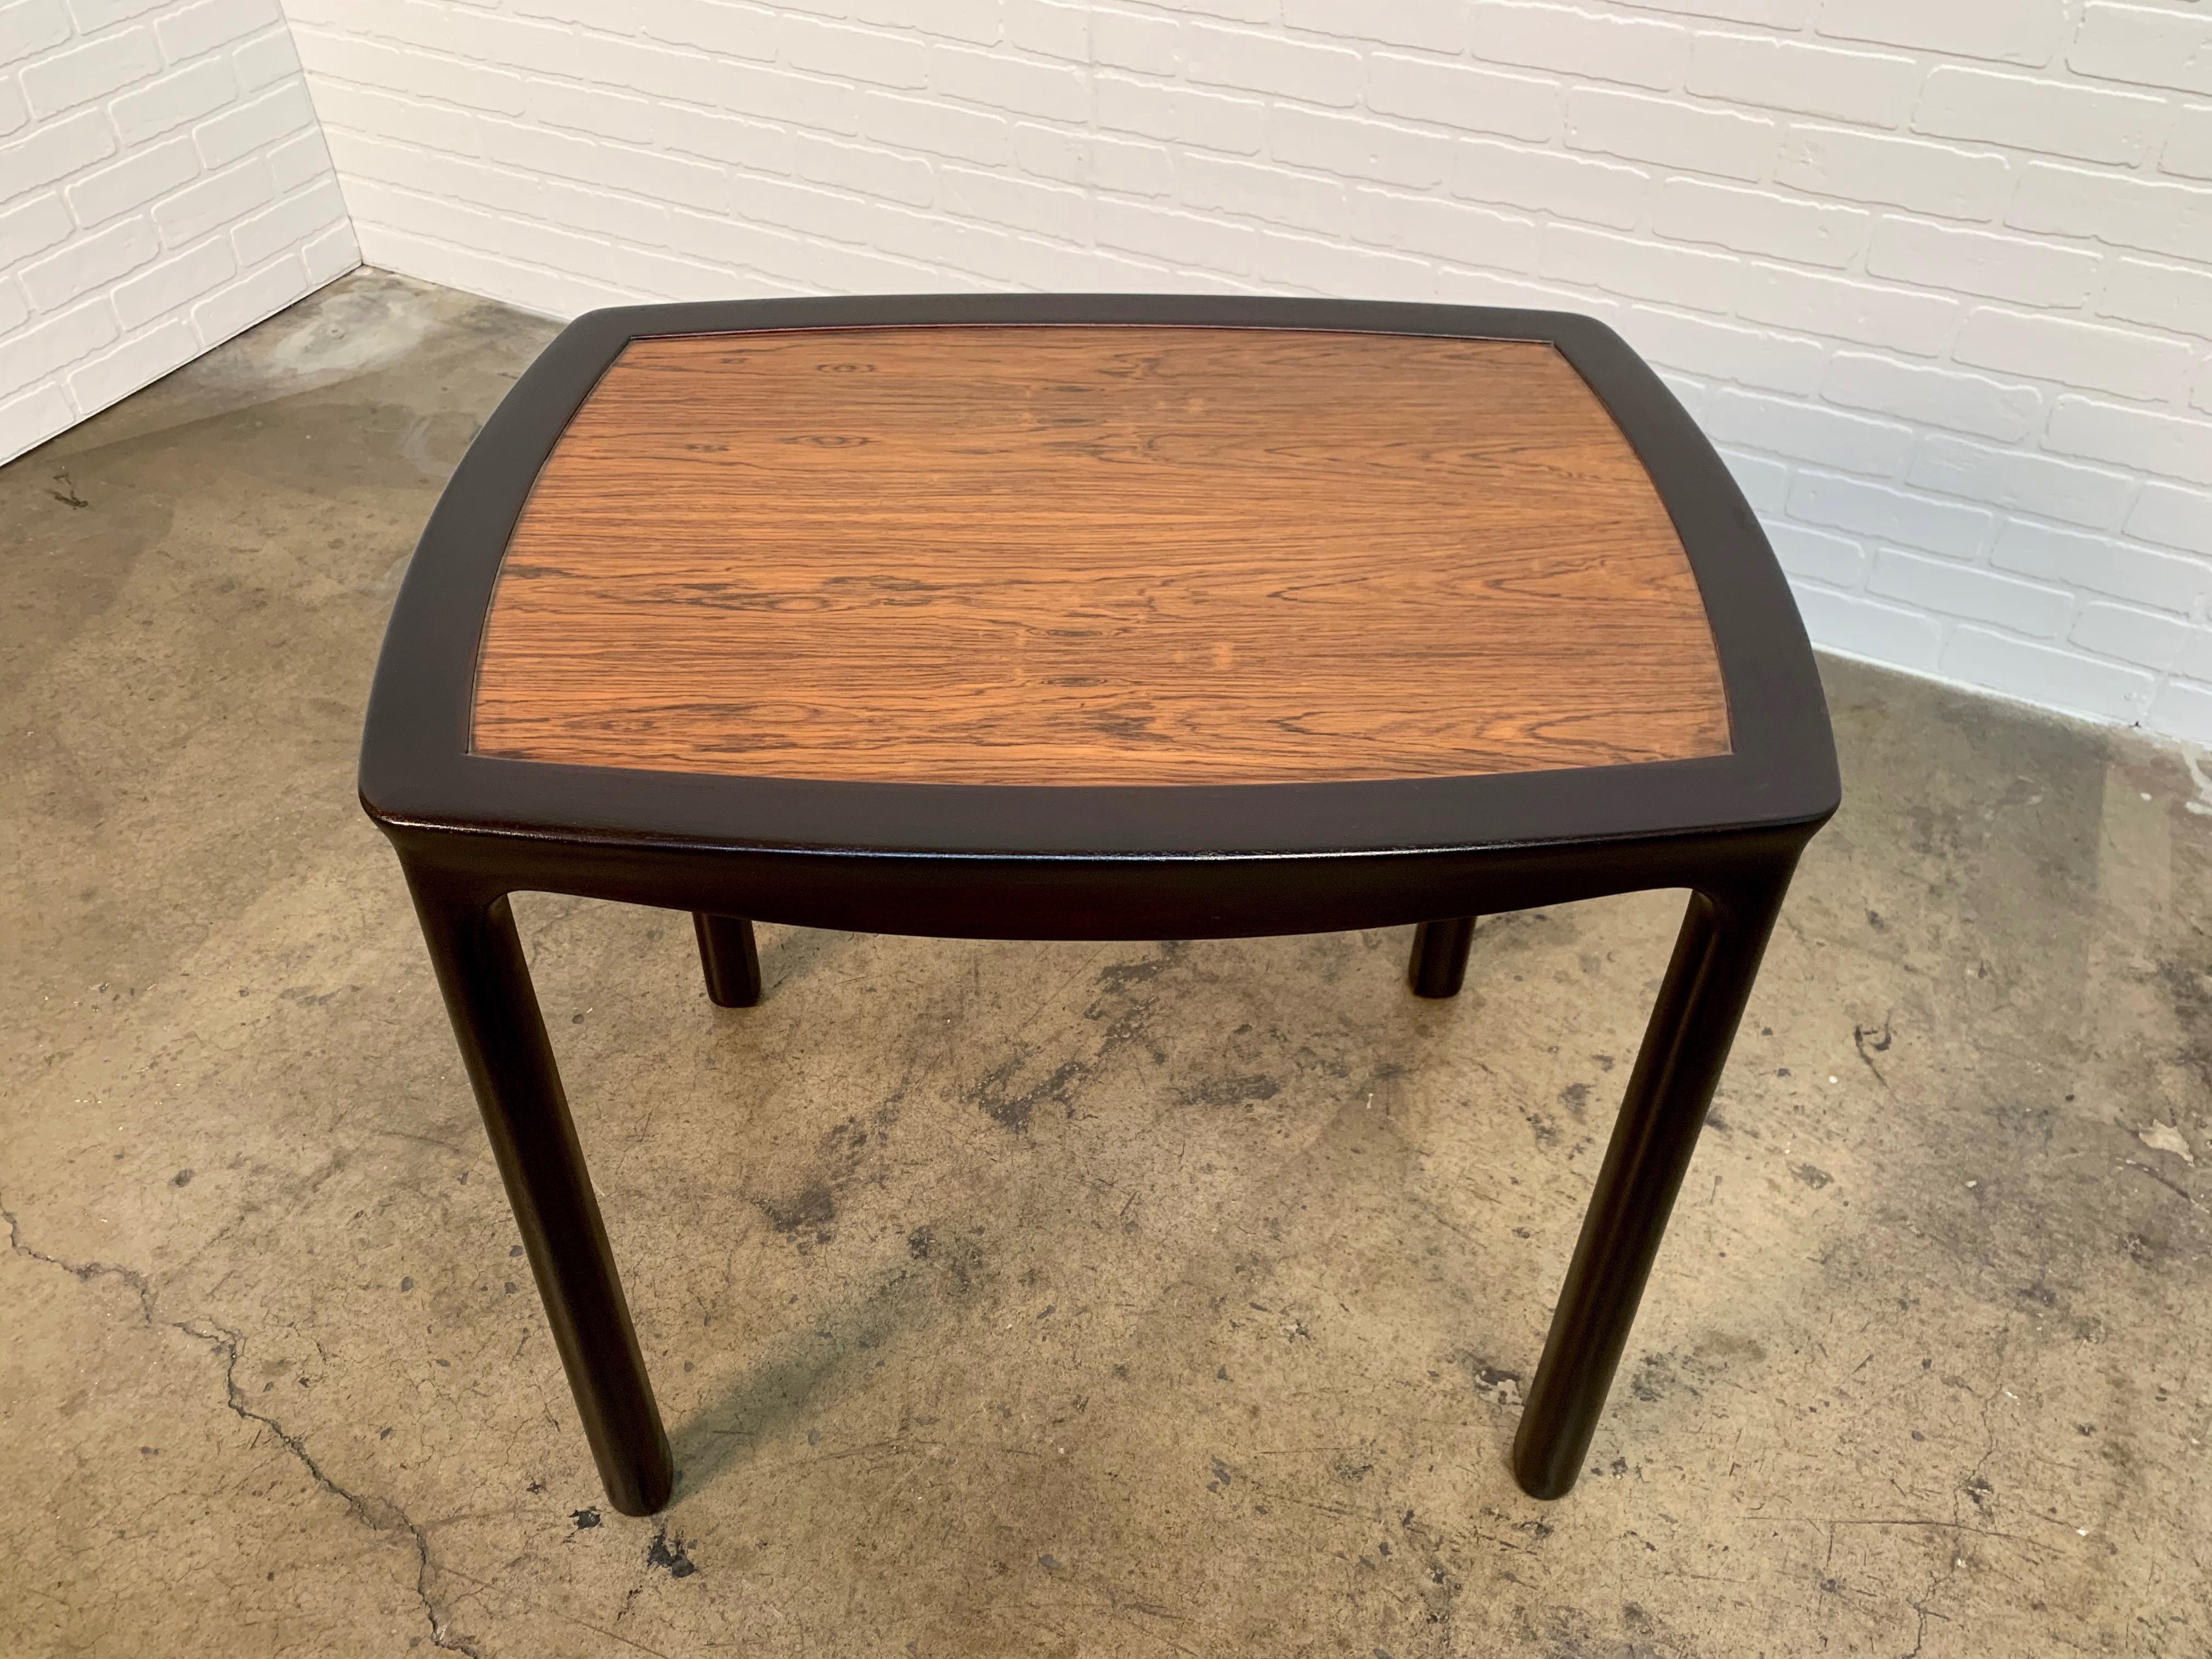 Rosewood side table by Edward Wormley for Dunbar.